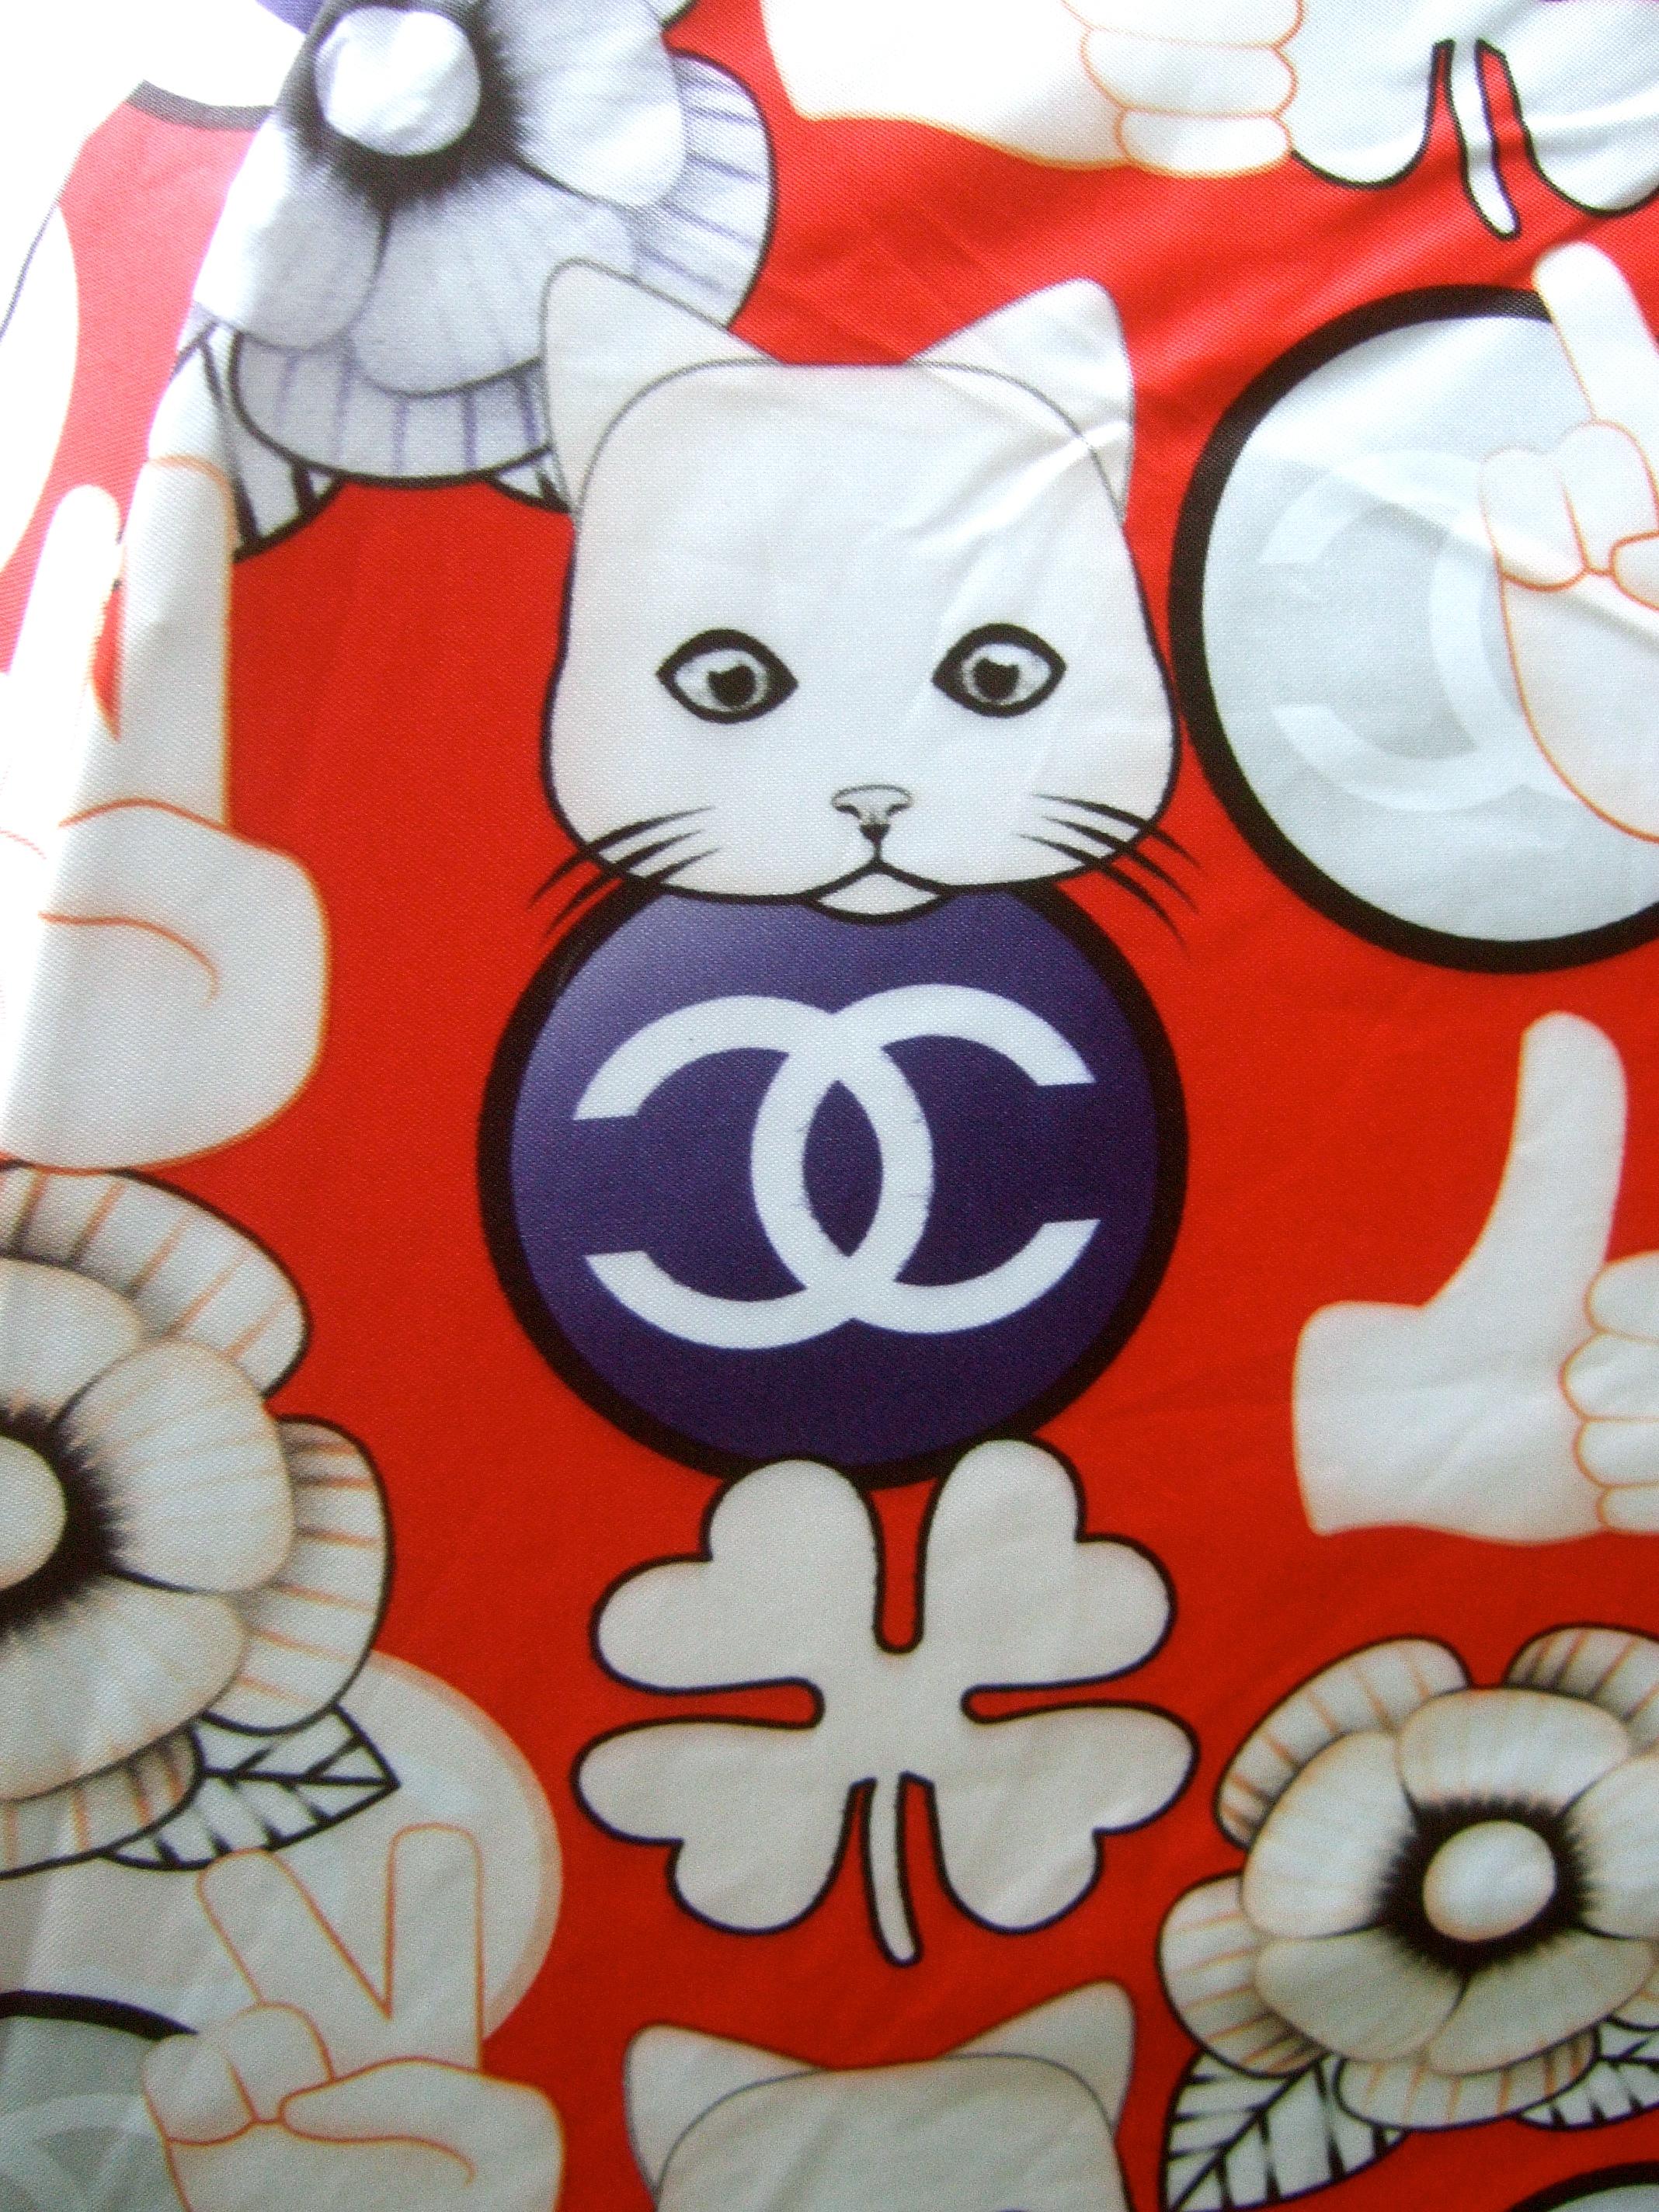 Chanel cat theme umbrella in Chanel presentaion box 21st C 
The charming red nylon umbrella is desigend with endearing
cat faces, four leaf clovers, camellia flowers, hand symbols
and Chanel circular logos with their iconic interlocked 
C.C.